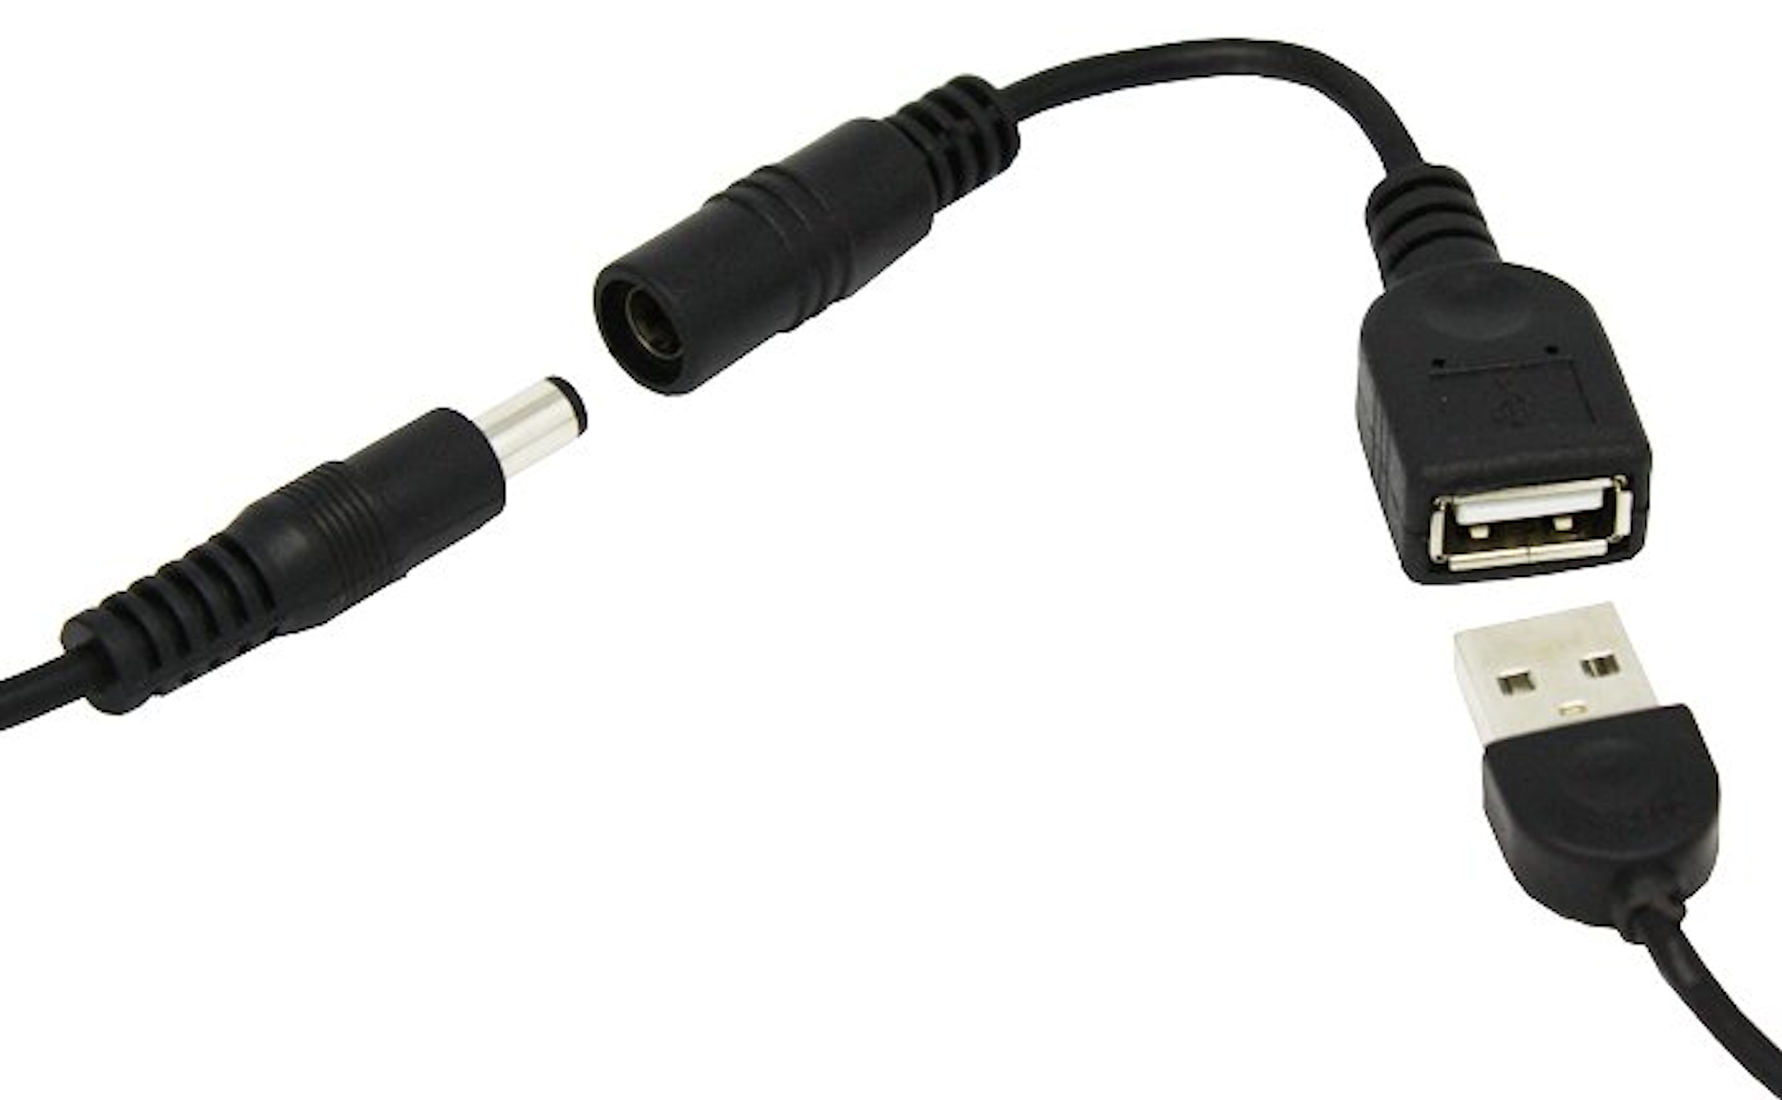 KJB A1028B USB to DC Battery Cable Converter for Xtreme Life Hidden Camera Connected